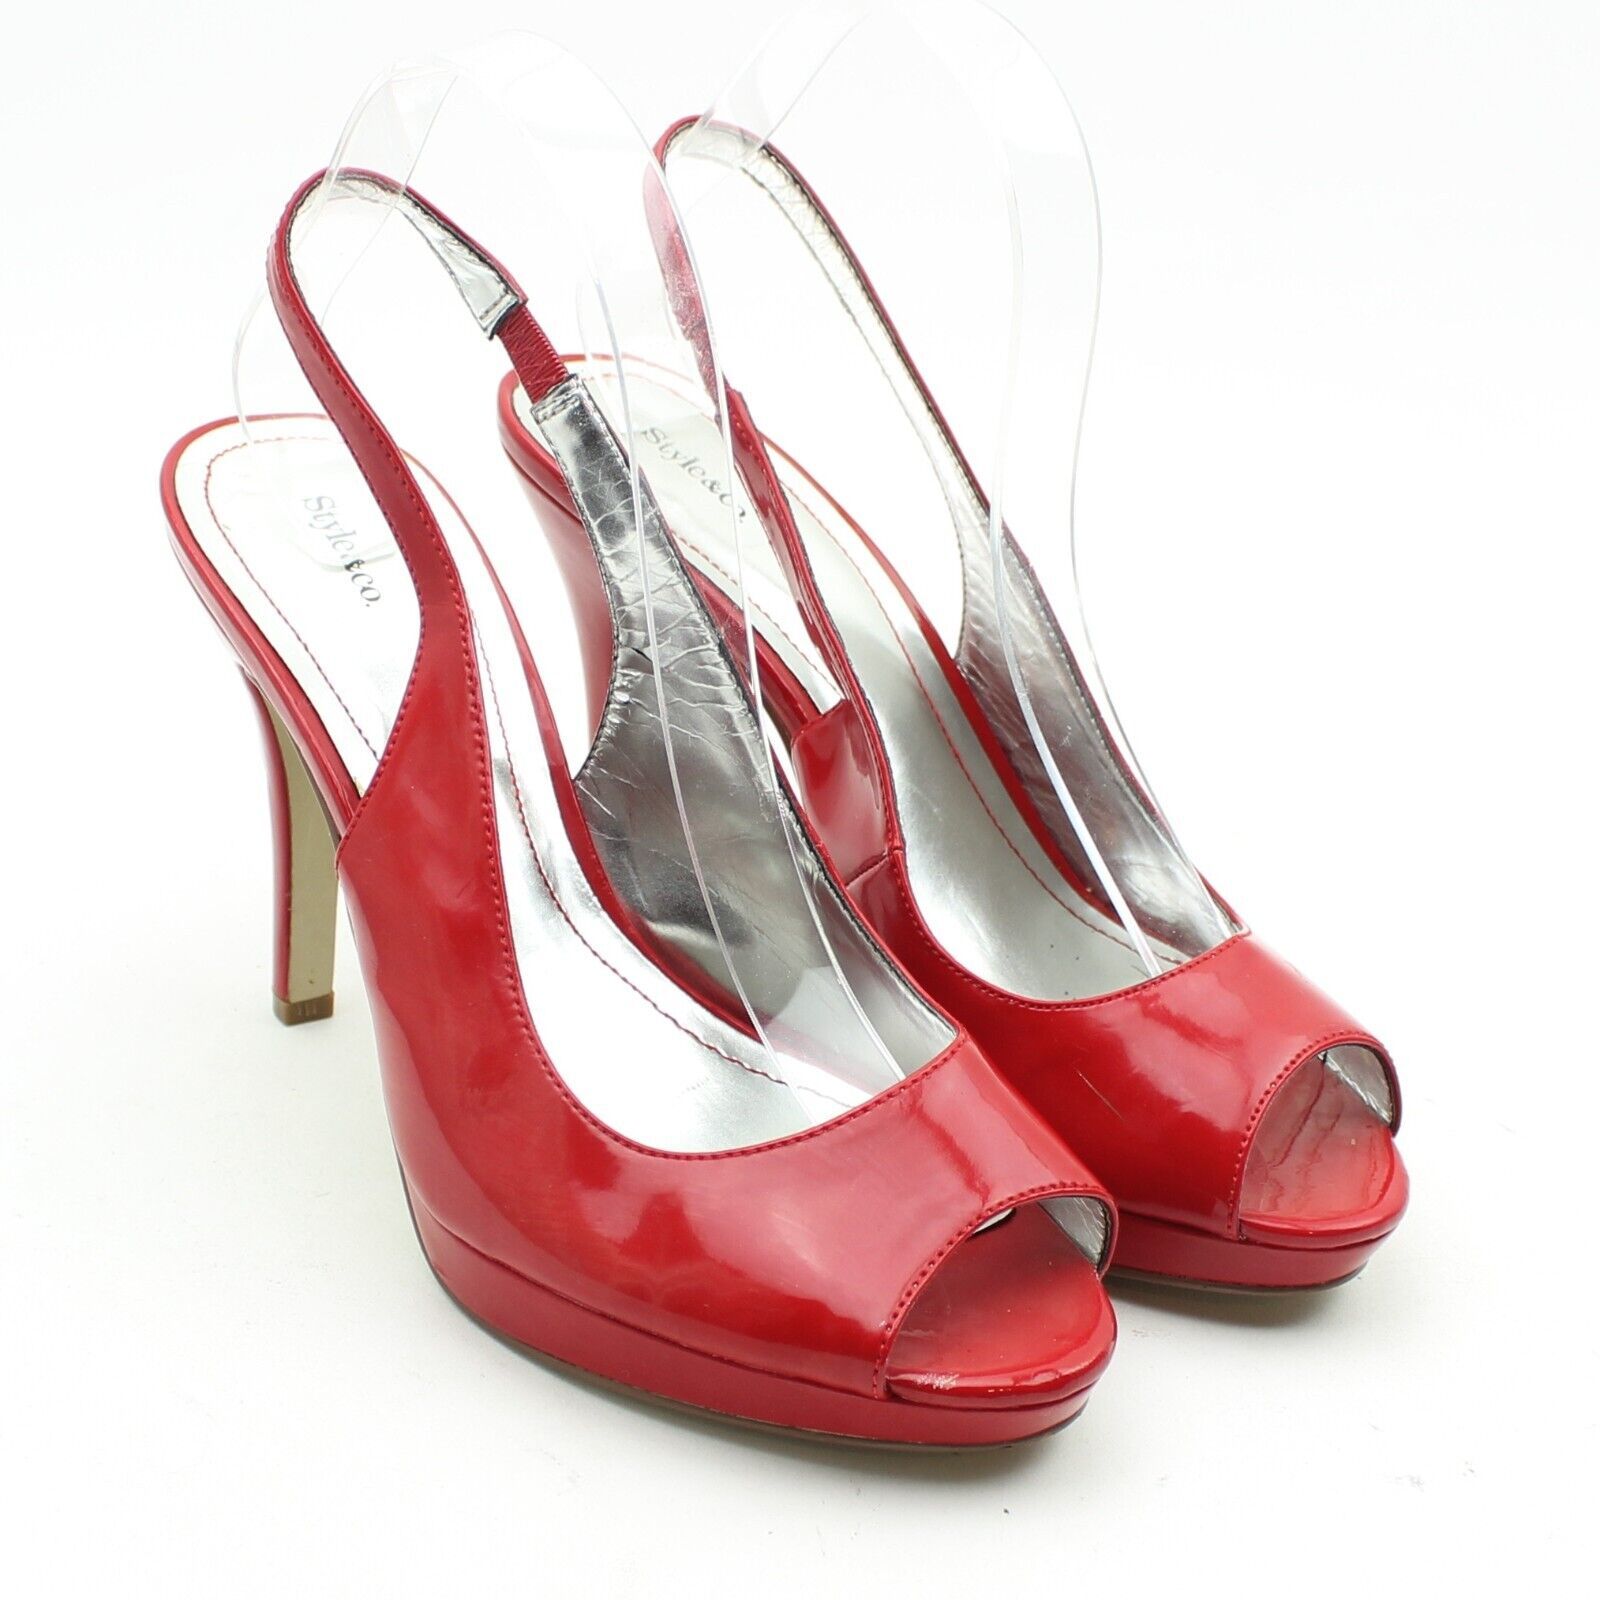 Primary image for Style & Co Womens Glossy Red Faux Leather Peep Toe Slingback Heels Sz 9.5 M